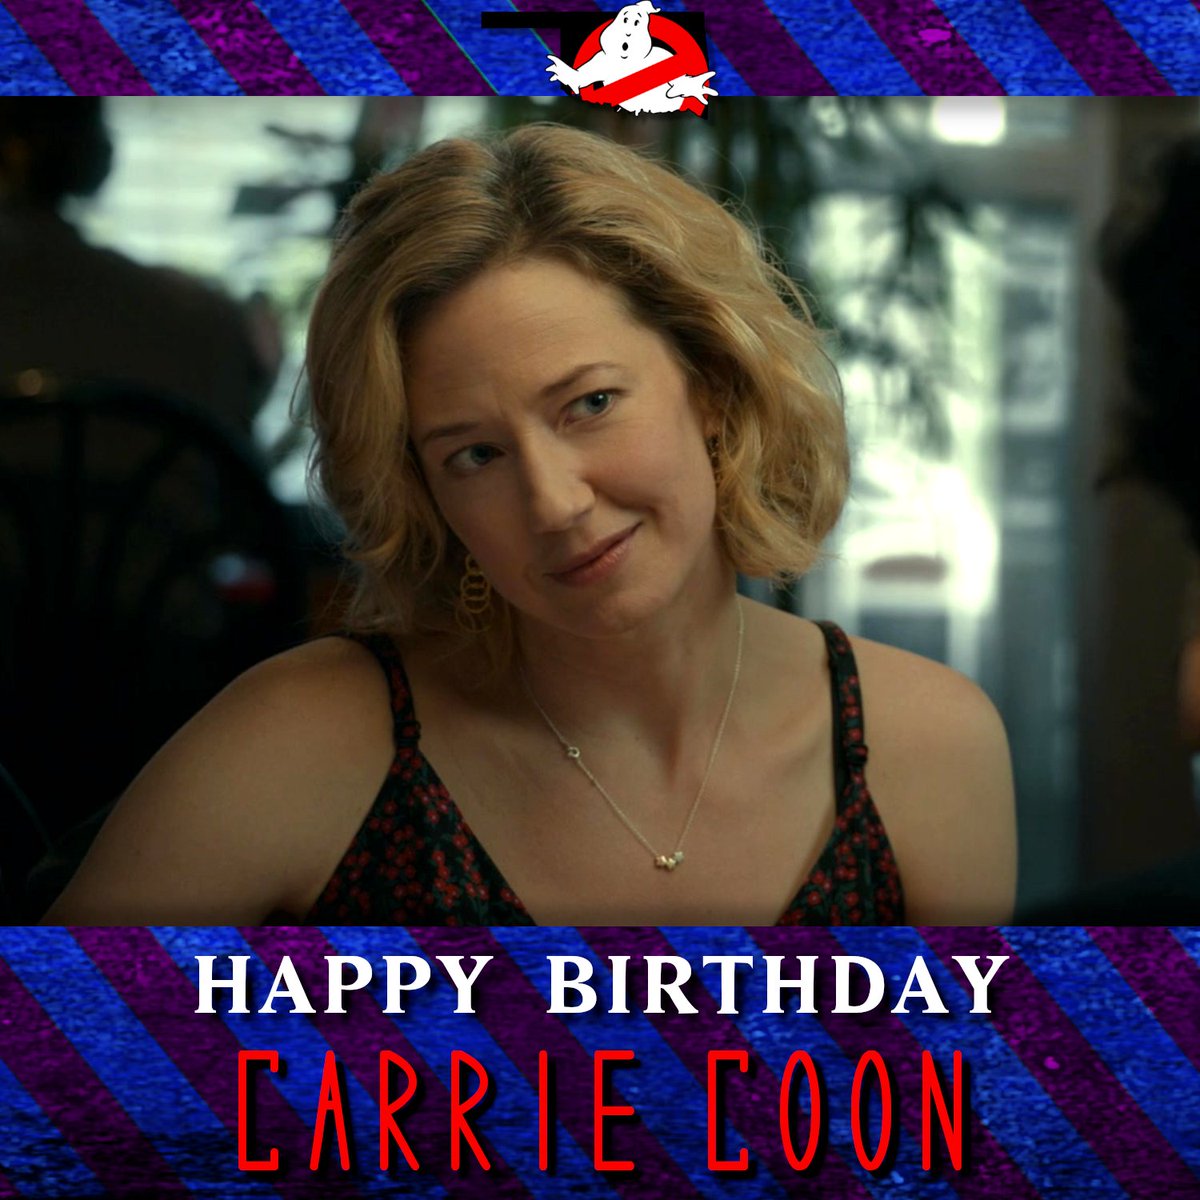 Sending out happy birthday wishes to the wonderful @carriecoon on this Janurary 24th! Don't be yourself!

#Ghostbusters #GhostbustersAfterlife #CallieSpengler #Spengler #CarrieCoon #Birthday